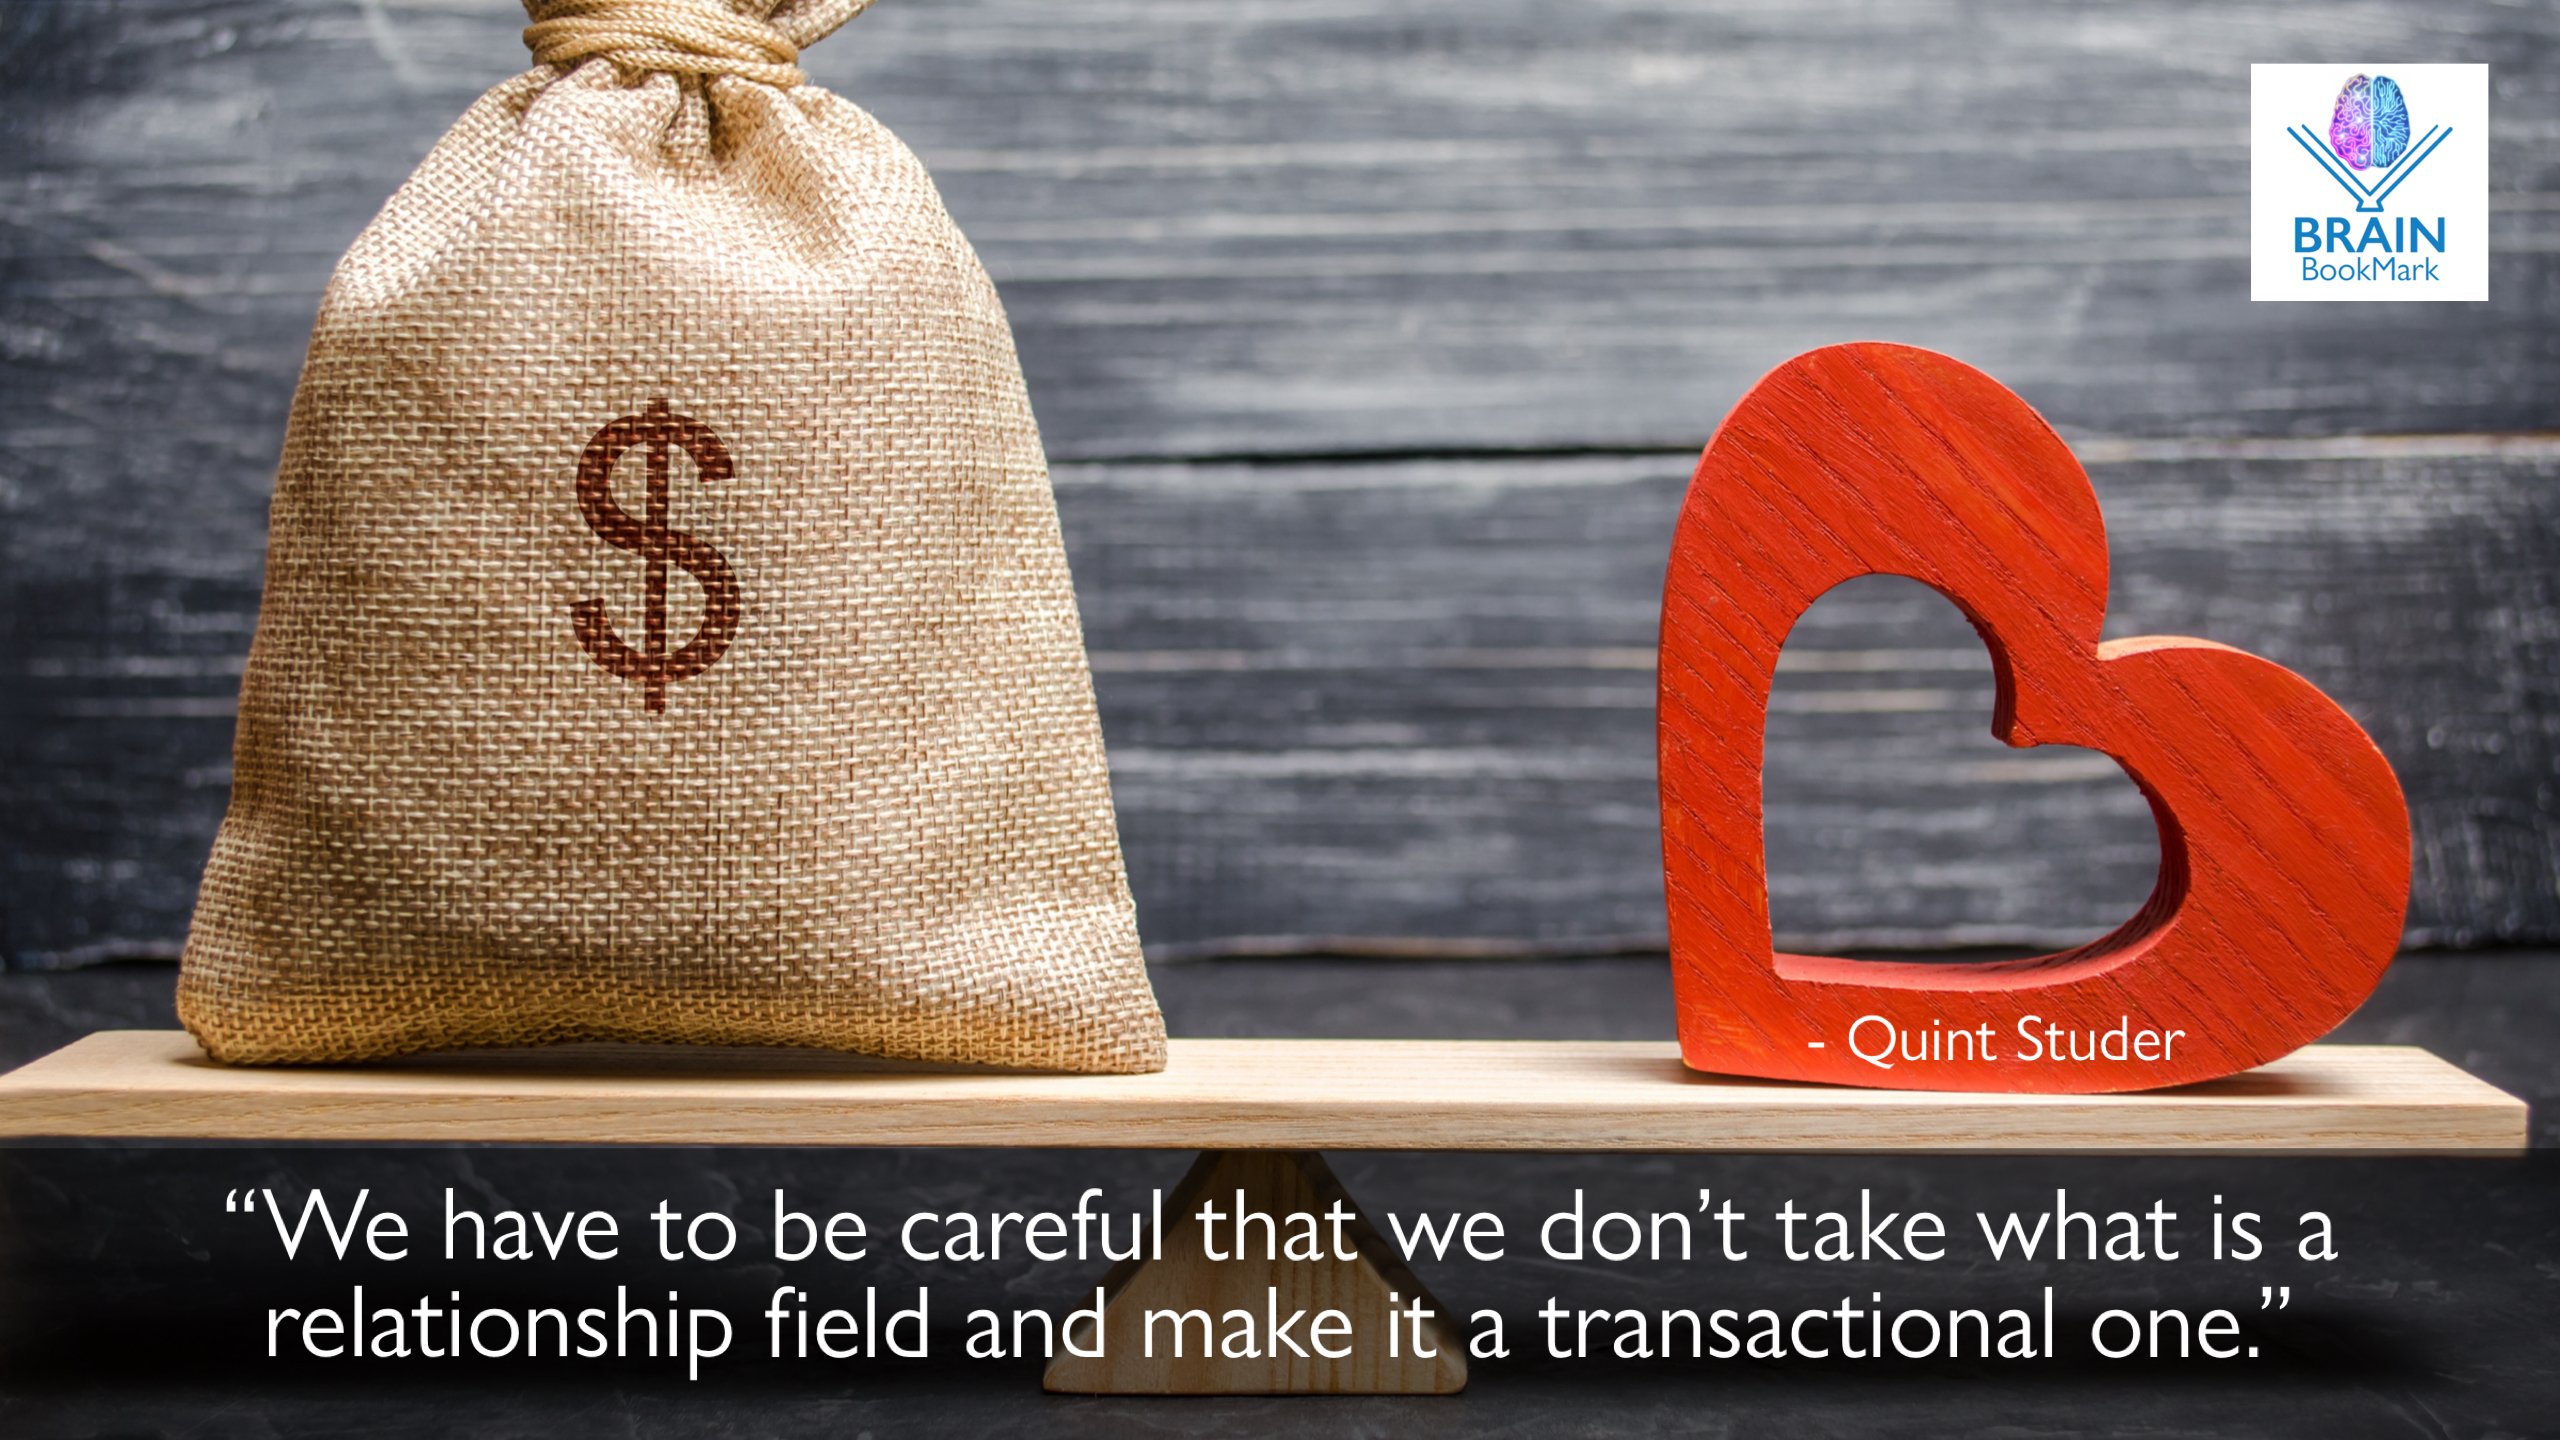 "We have to be careful that we don't take what is a relationship field and make it a transactional one." - Quint Studer